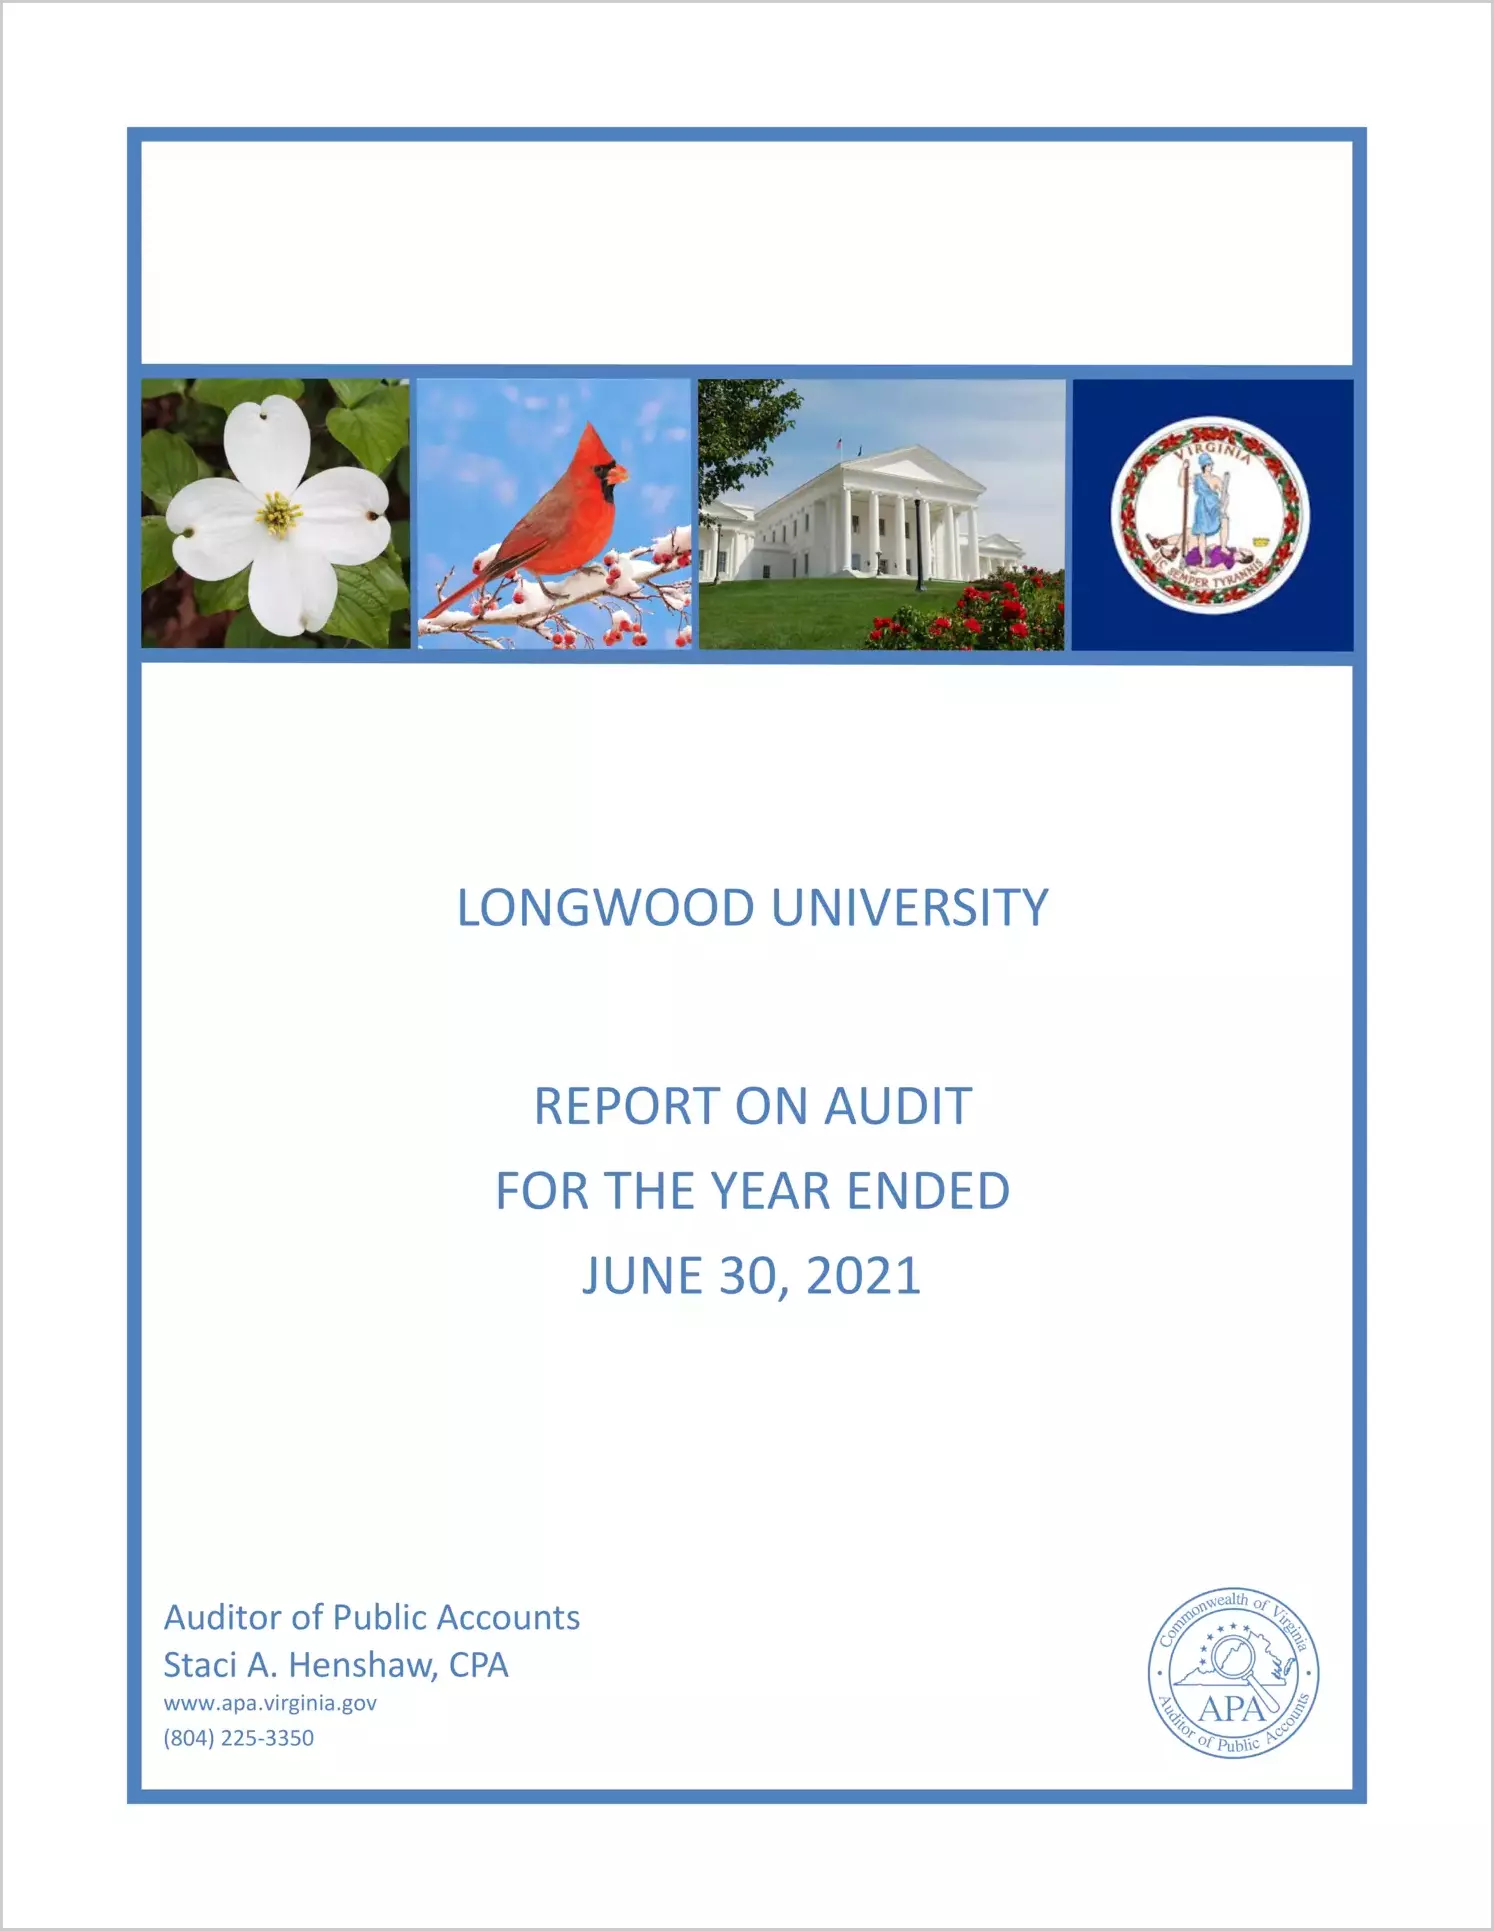 Longwood University for the year ended June 30, 2021